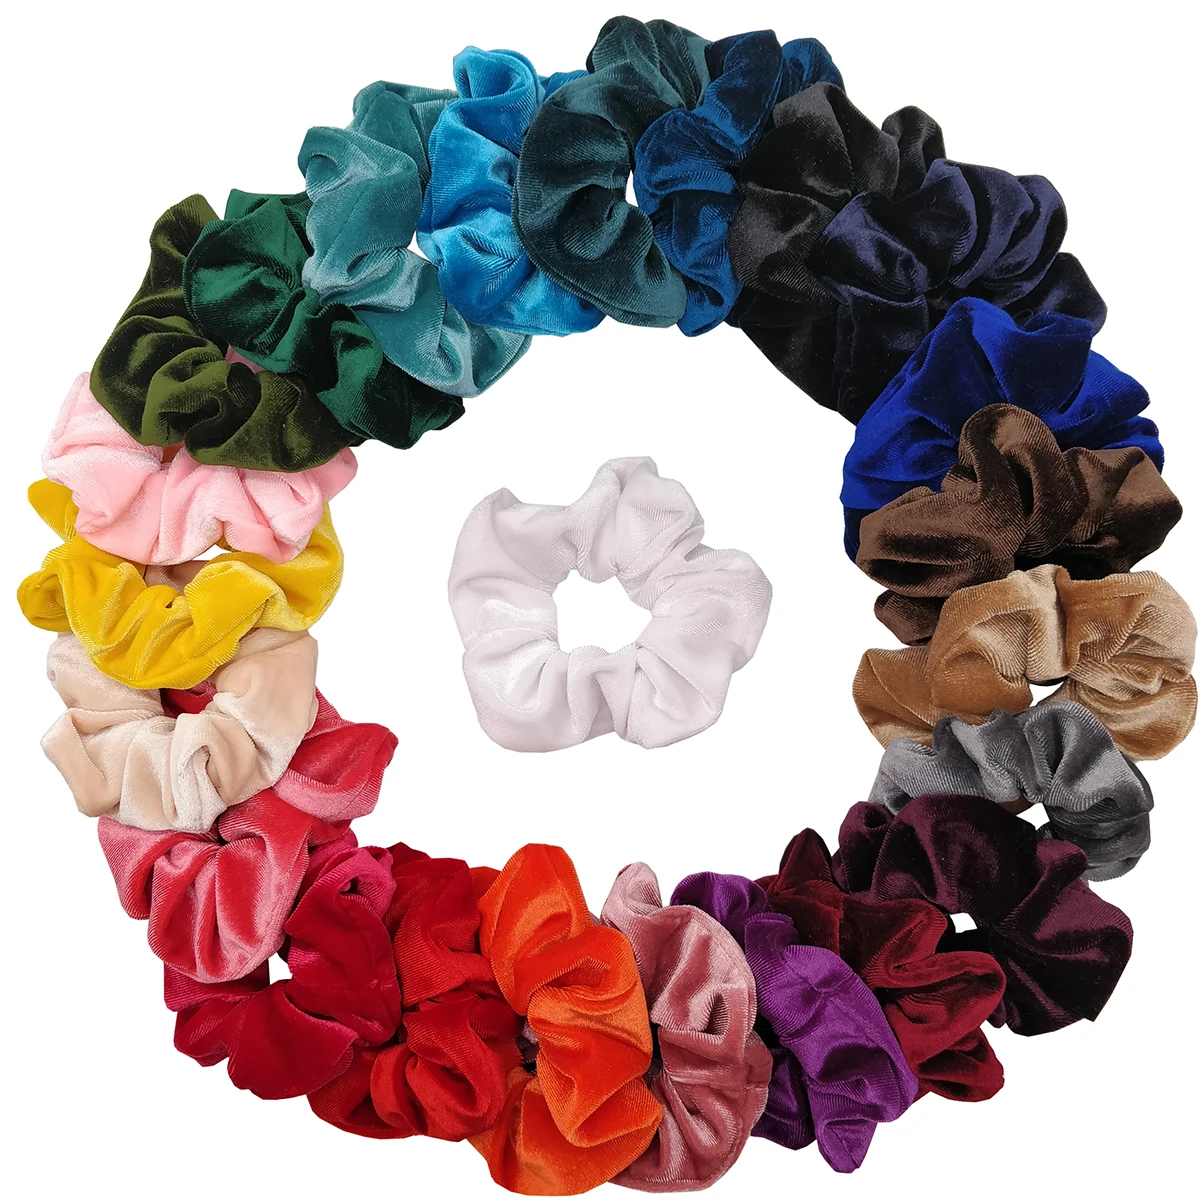 50/40/30pc Winter Soft Hair Scrunchies for Women Girl Plush Elastic Tie Rubber Band Christmas Santa Accessories Fluffy Fake Fur classic dusty blue silk flowers wrist corsages for women fake silk rose for damas de honor wedding prom decor accessories